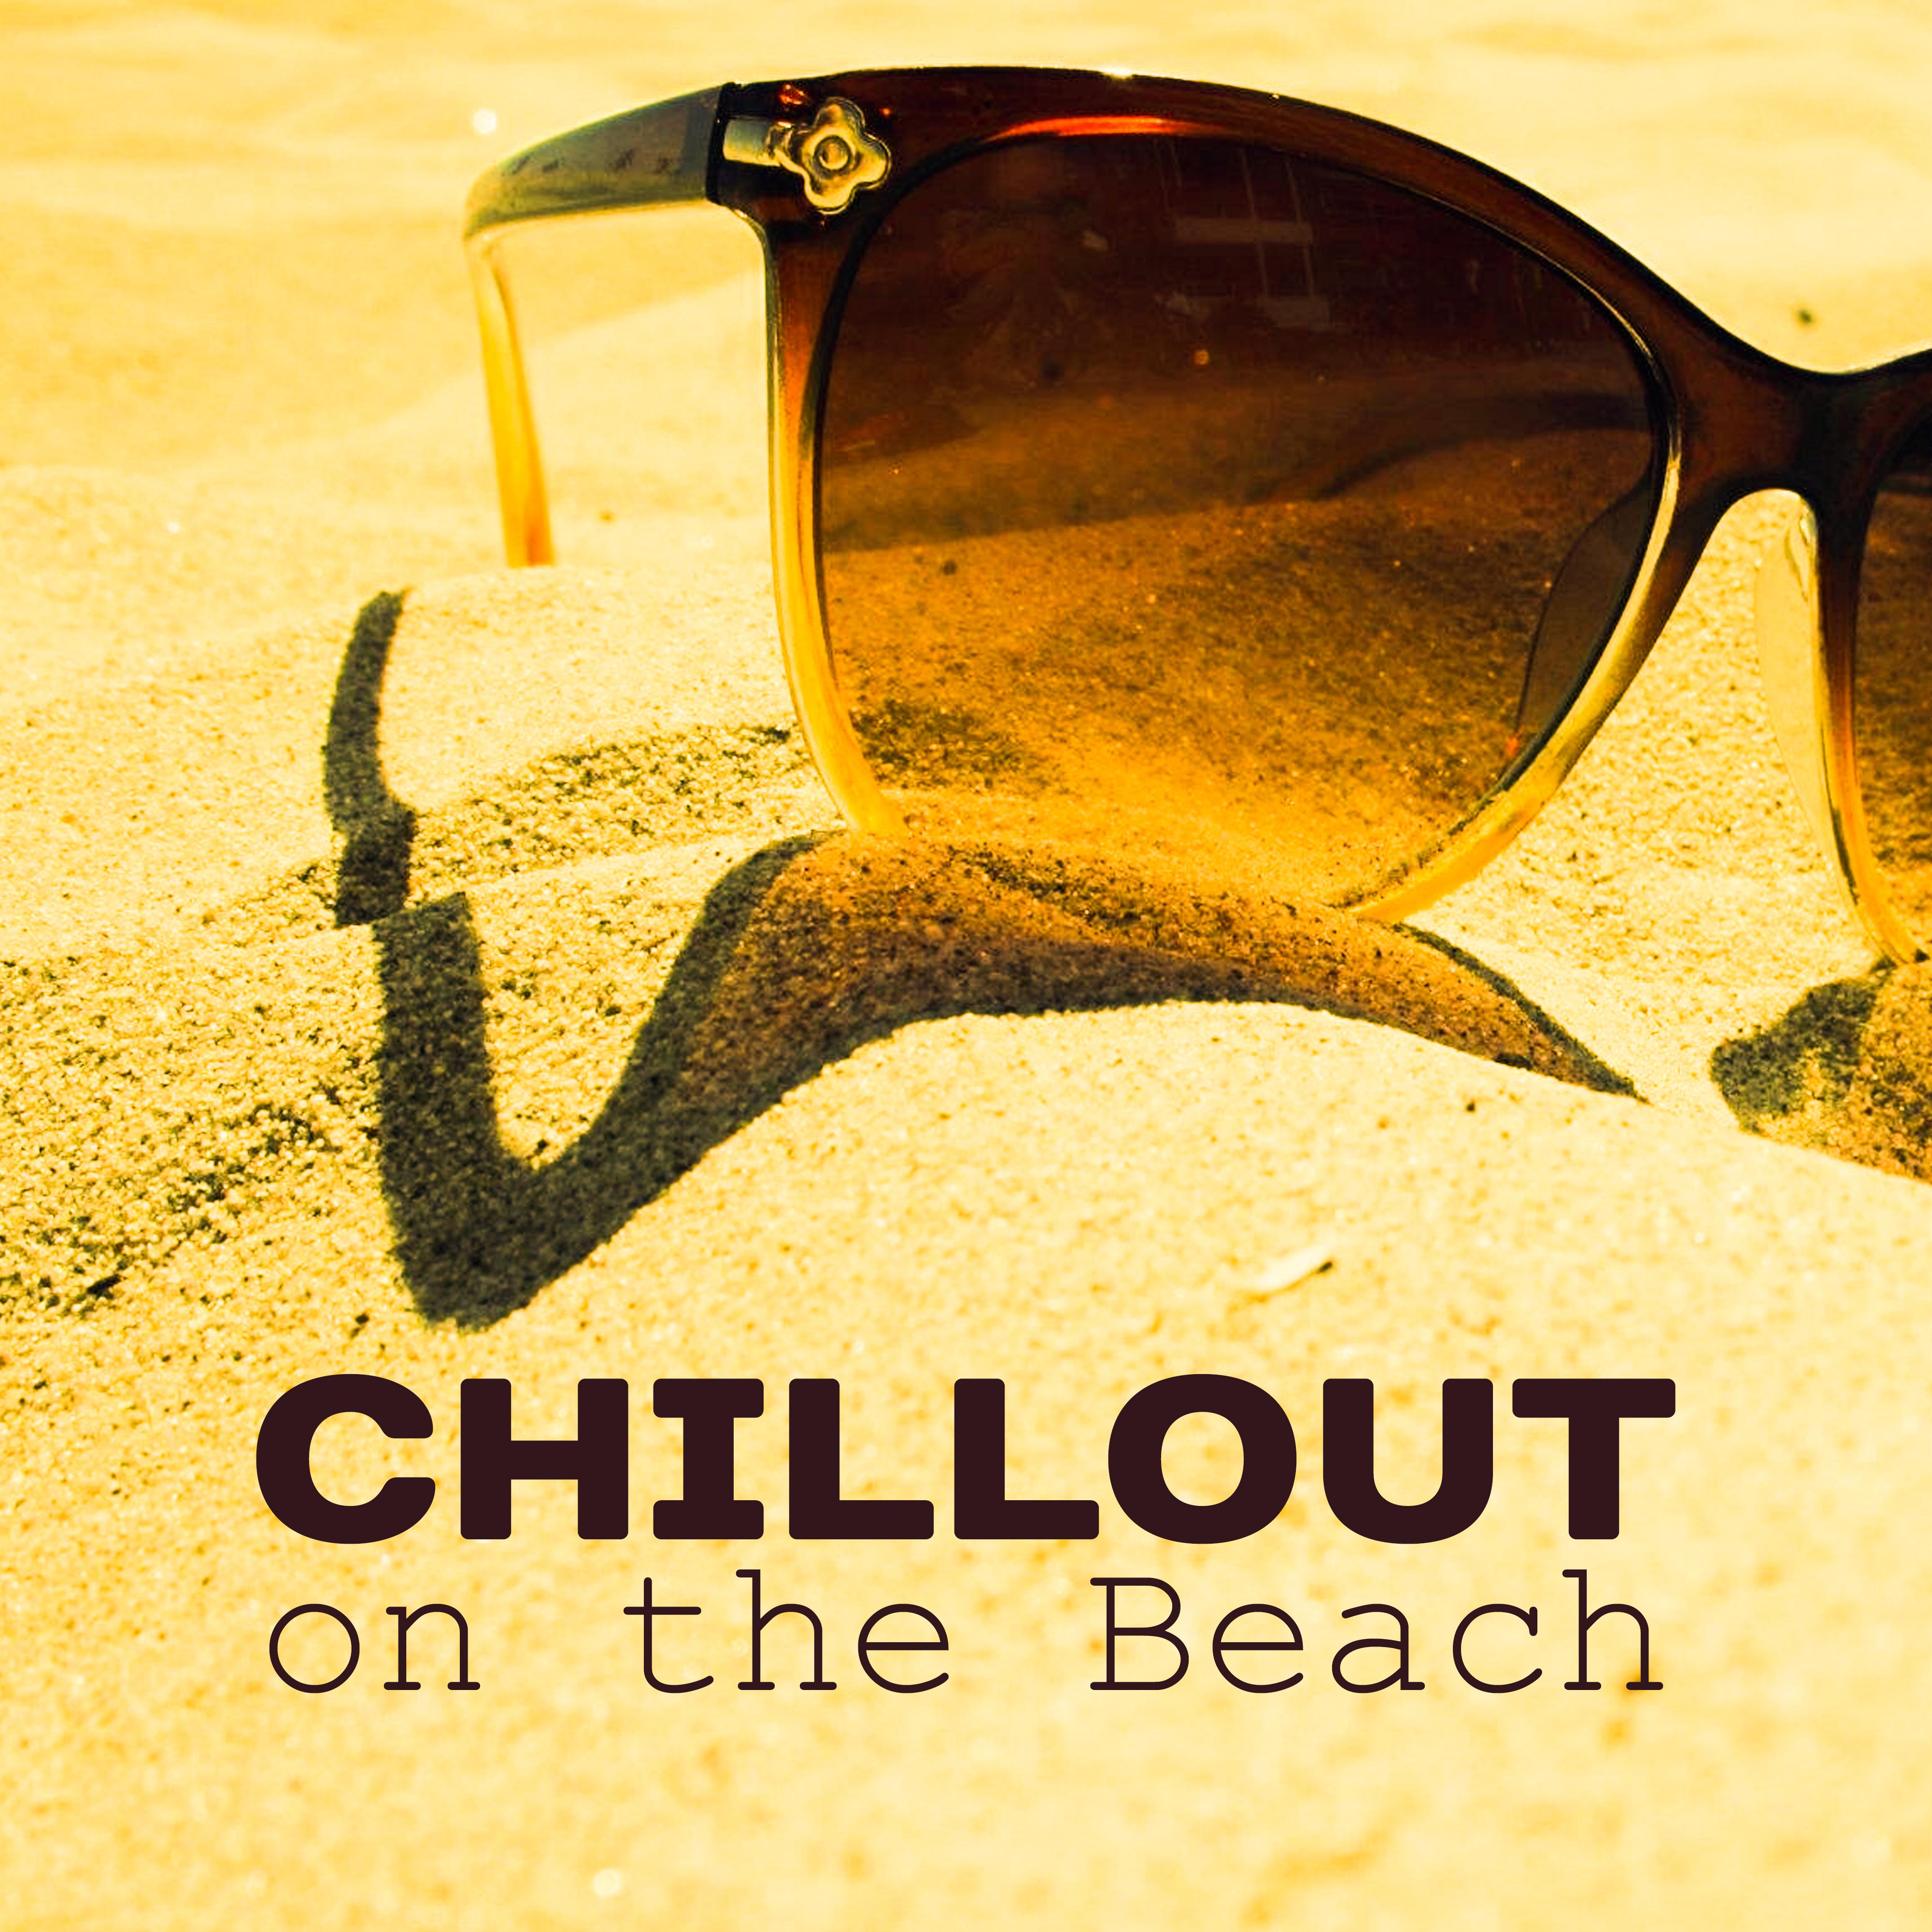 Chillout on the Beach – Holiday Songs, Summer Chill, Calm Down, Stress Free, Sunshine, Chillout Lounge, Ibiza Chill, Beach Music